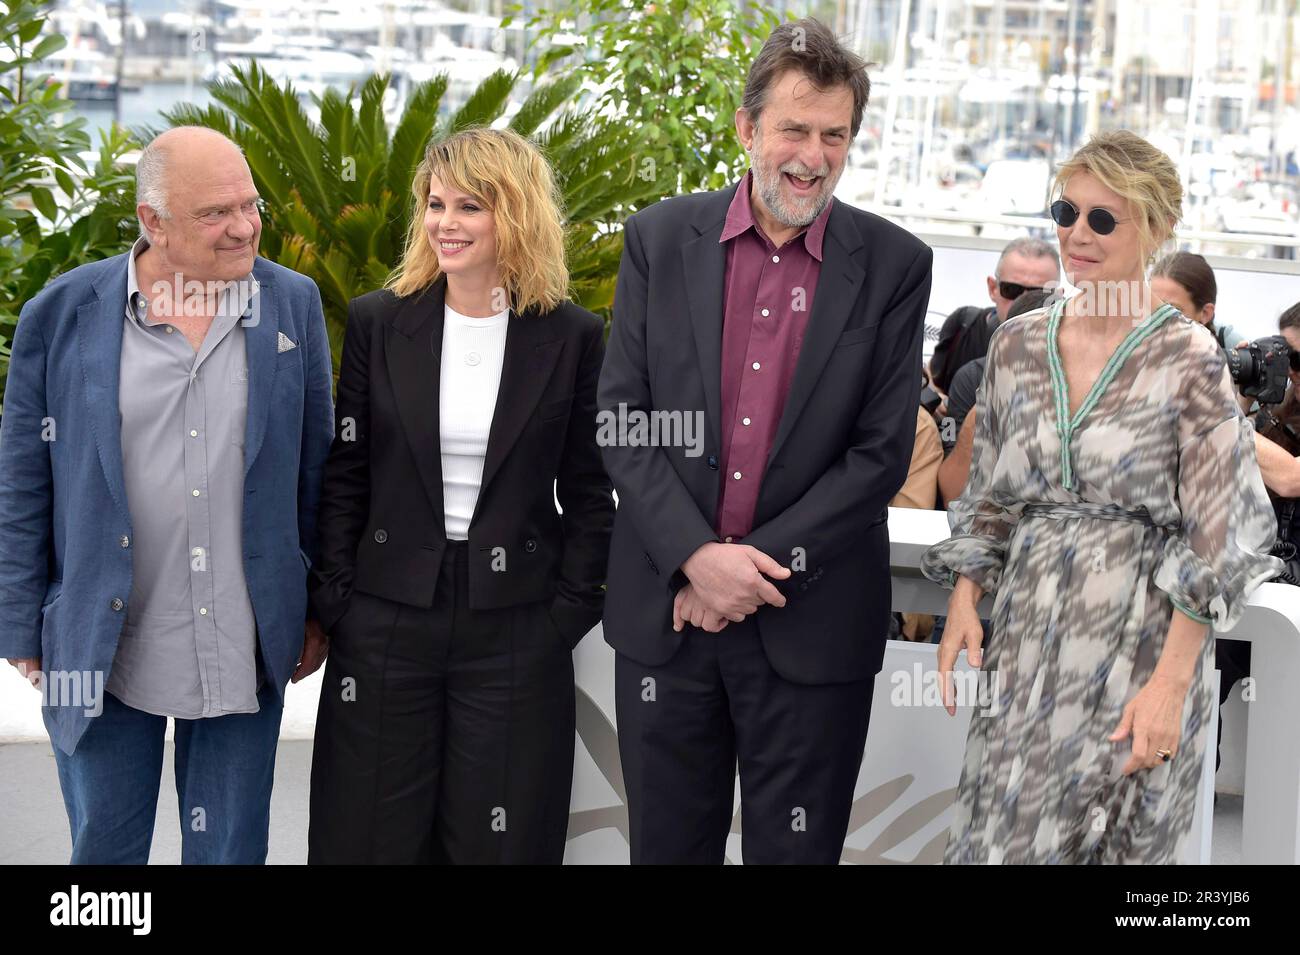 Cannes, France. 25th May, 2023. CANNES, FRANCE - MAY 25:Teco Celio, Barbora Bobulová, director Nanni Moretti, Margherita Buy attend the 'Il Sol Dell'avvenire (A Brighter Tomorrow)' photocall at the 76th annual Cannes film festival at Palais des Festivals on May 25, 2023 in Cannes, France. Credit: dpa/Alamy Live News Stock Photo